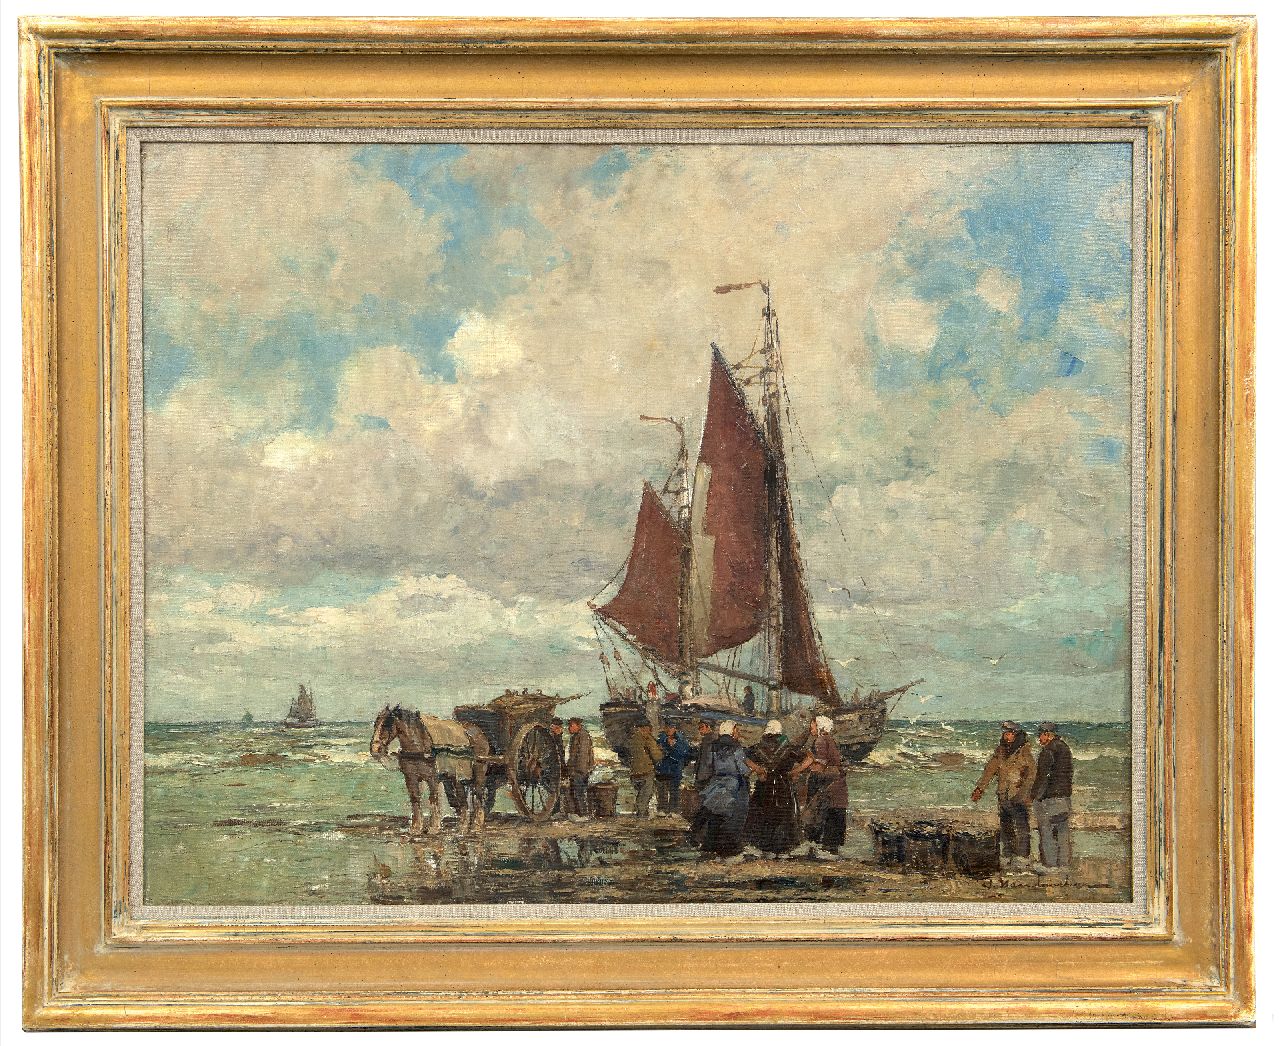 Hambüchen W.  | Wilhelm Hambüchen | Paintings offered for sale | A fishing barge and fishermen on the beach of katwijk, oil on canvas 60.2 x 80.4 cm, signed l.r.